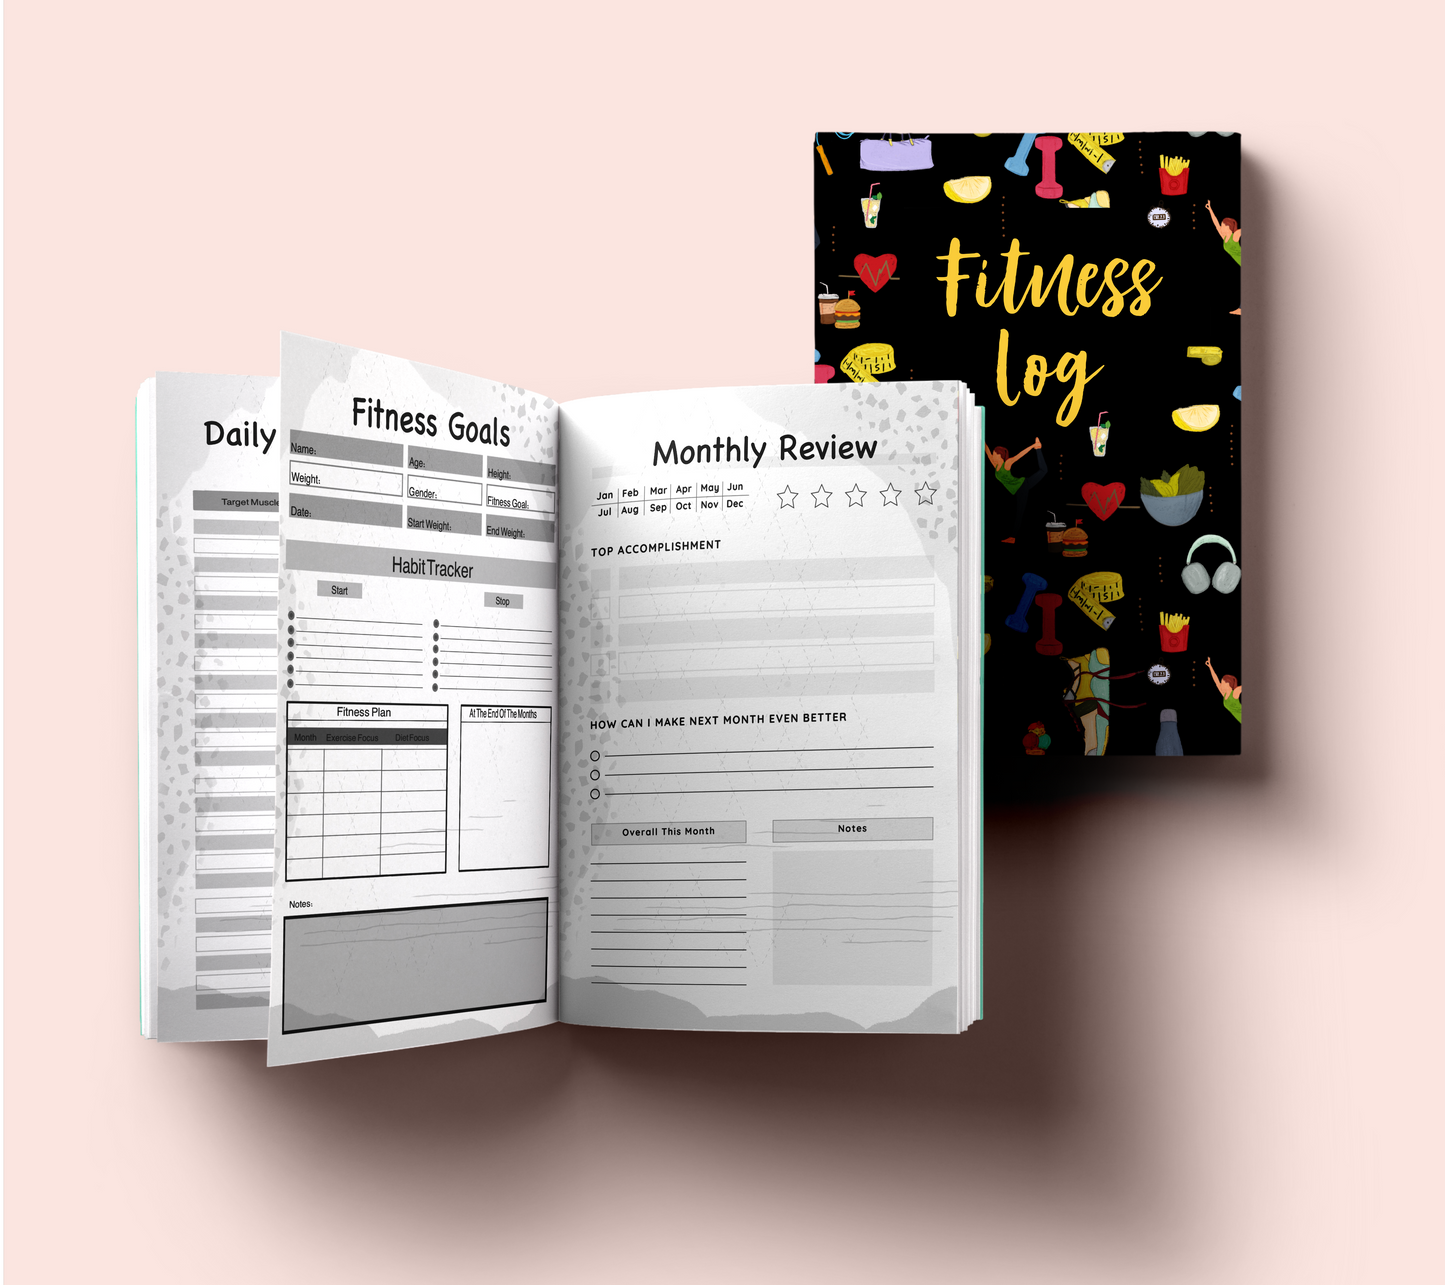 Fitness log Book with meal planner: Workout log book and fitness journal